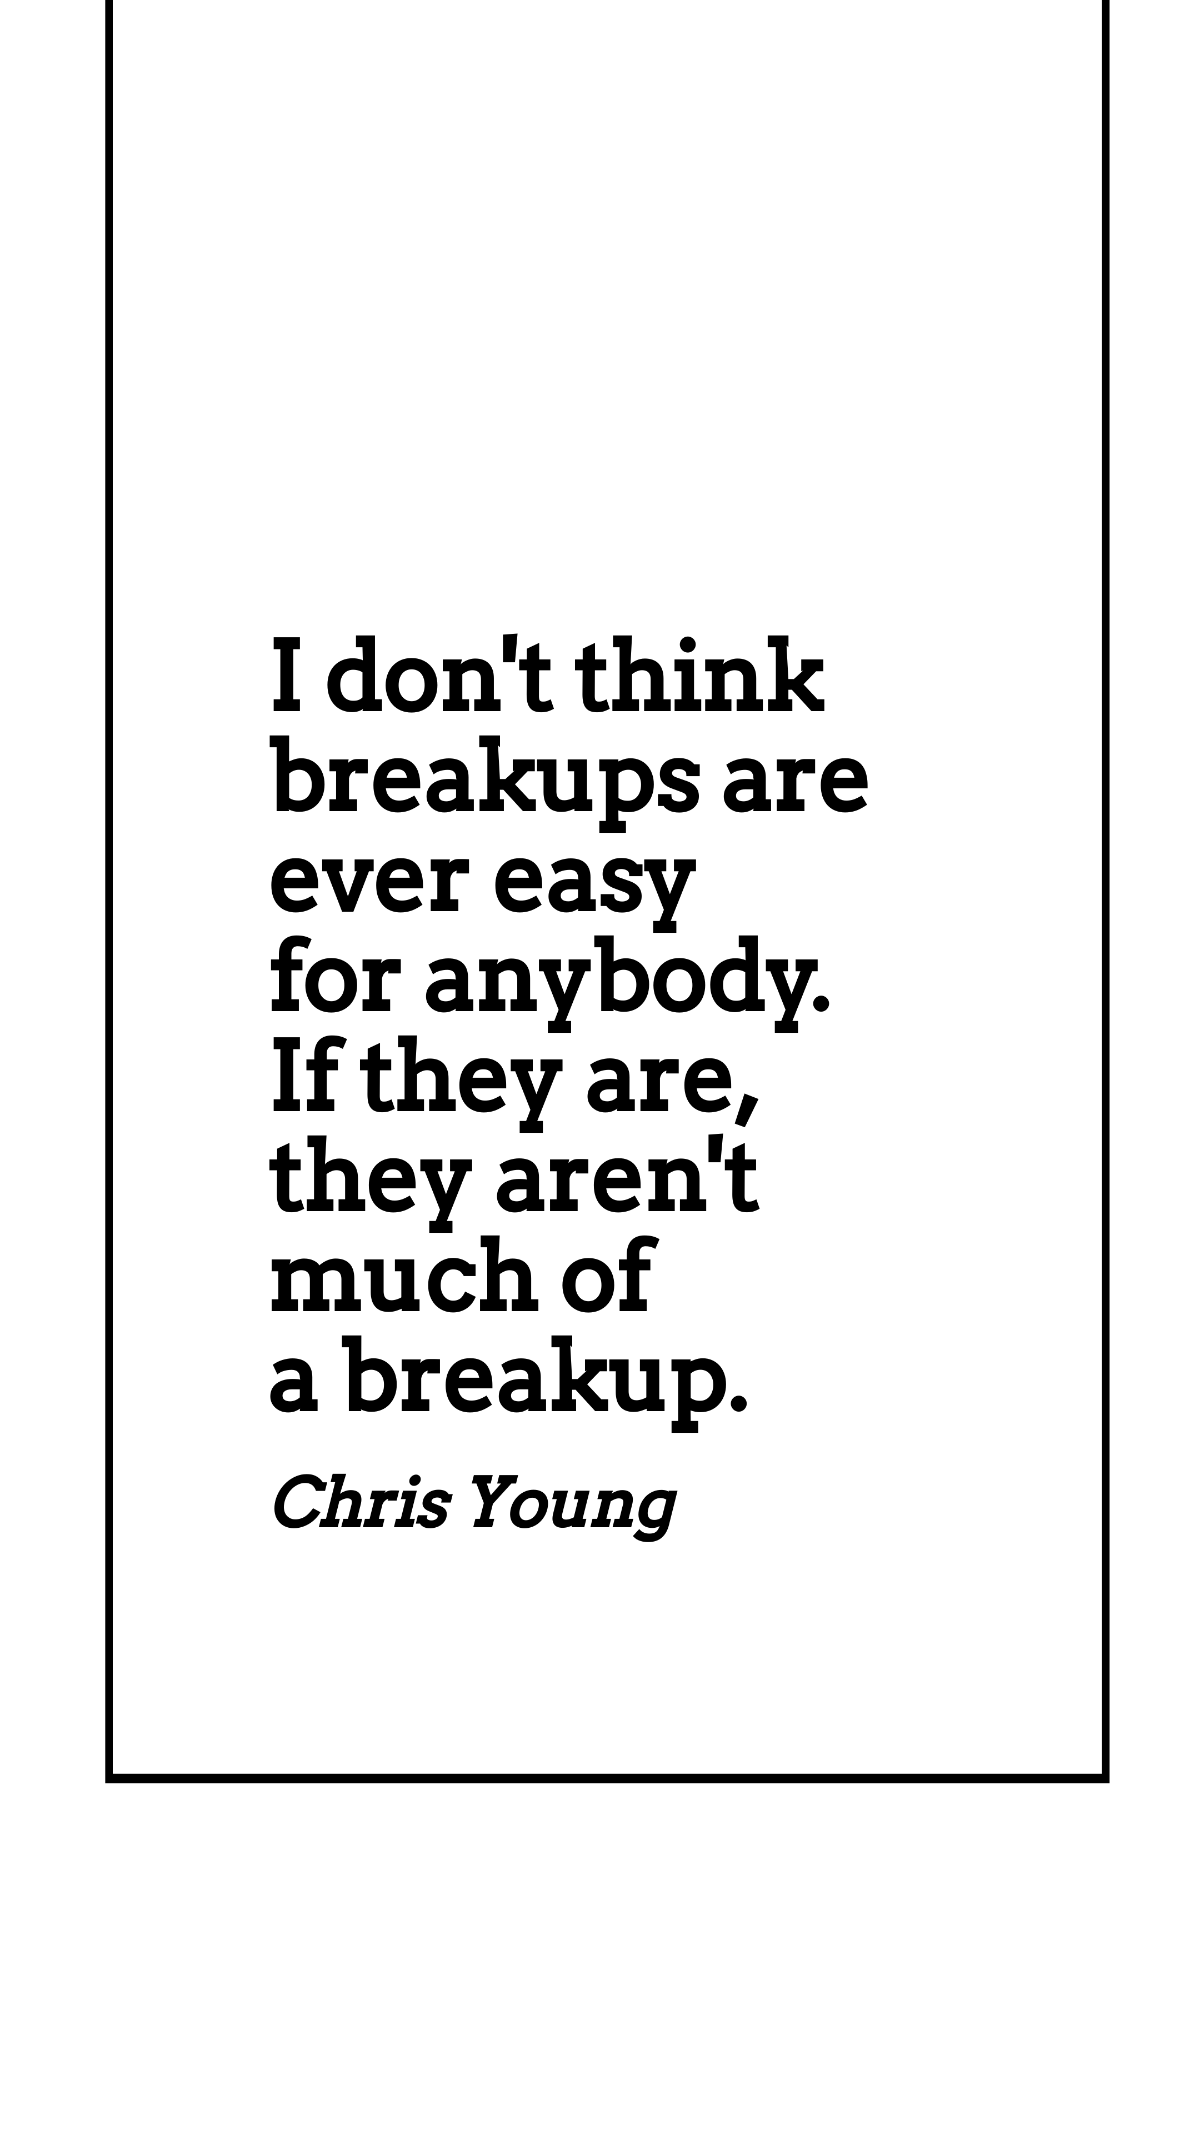 Chris Young - I don't think breakups are ever easy for anybody. If they are, they aren't much of a breakup. Template